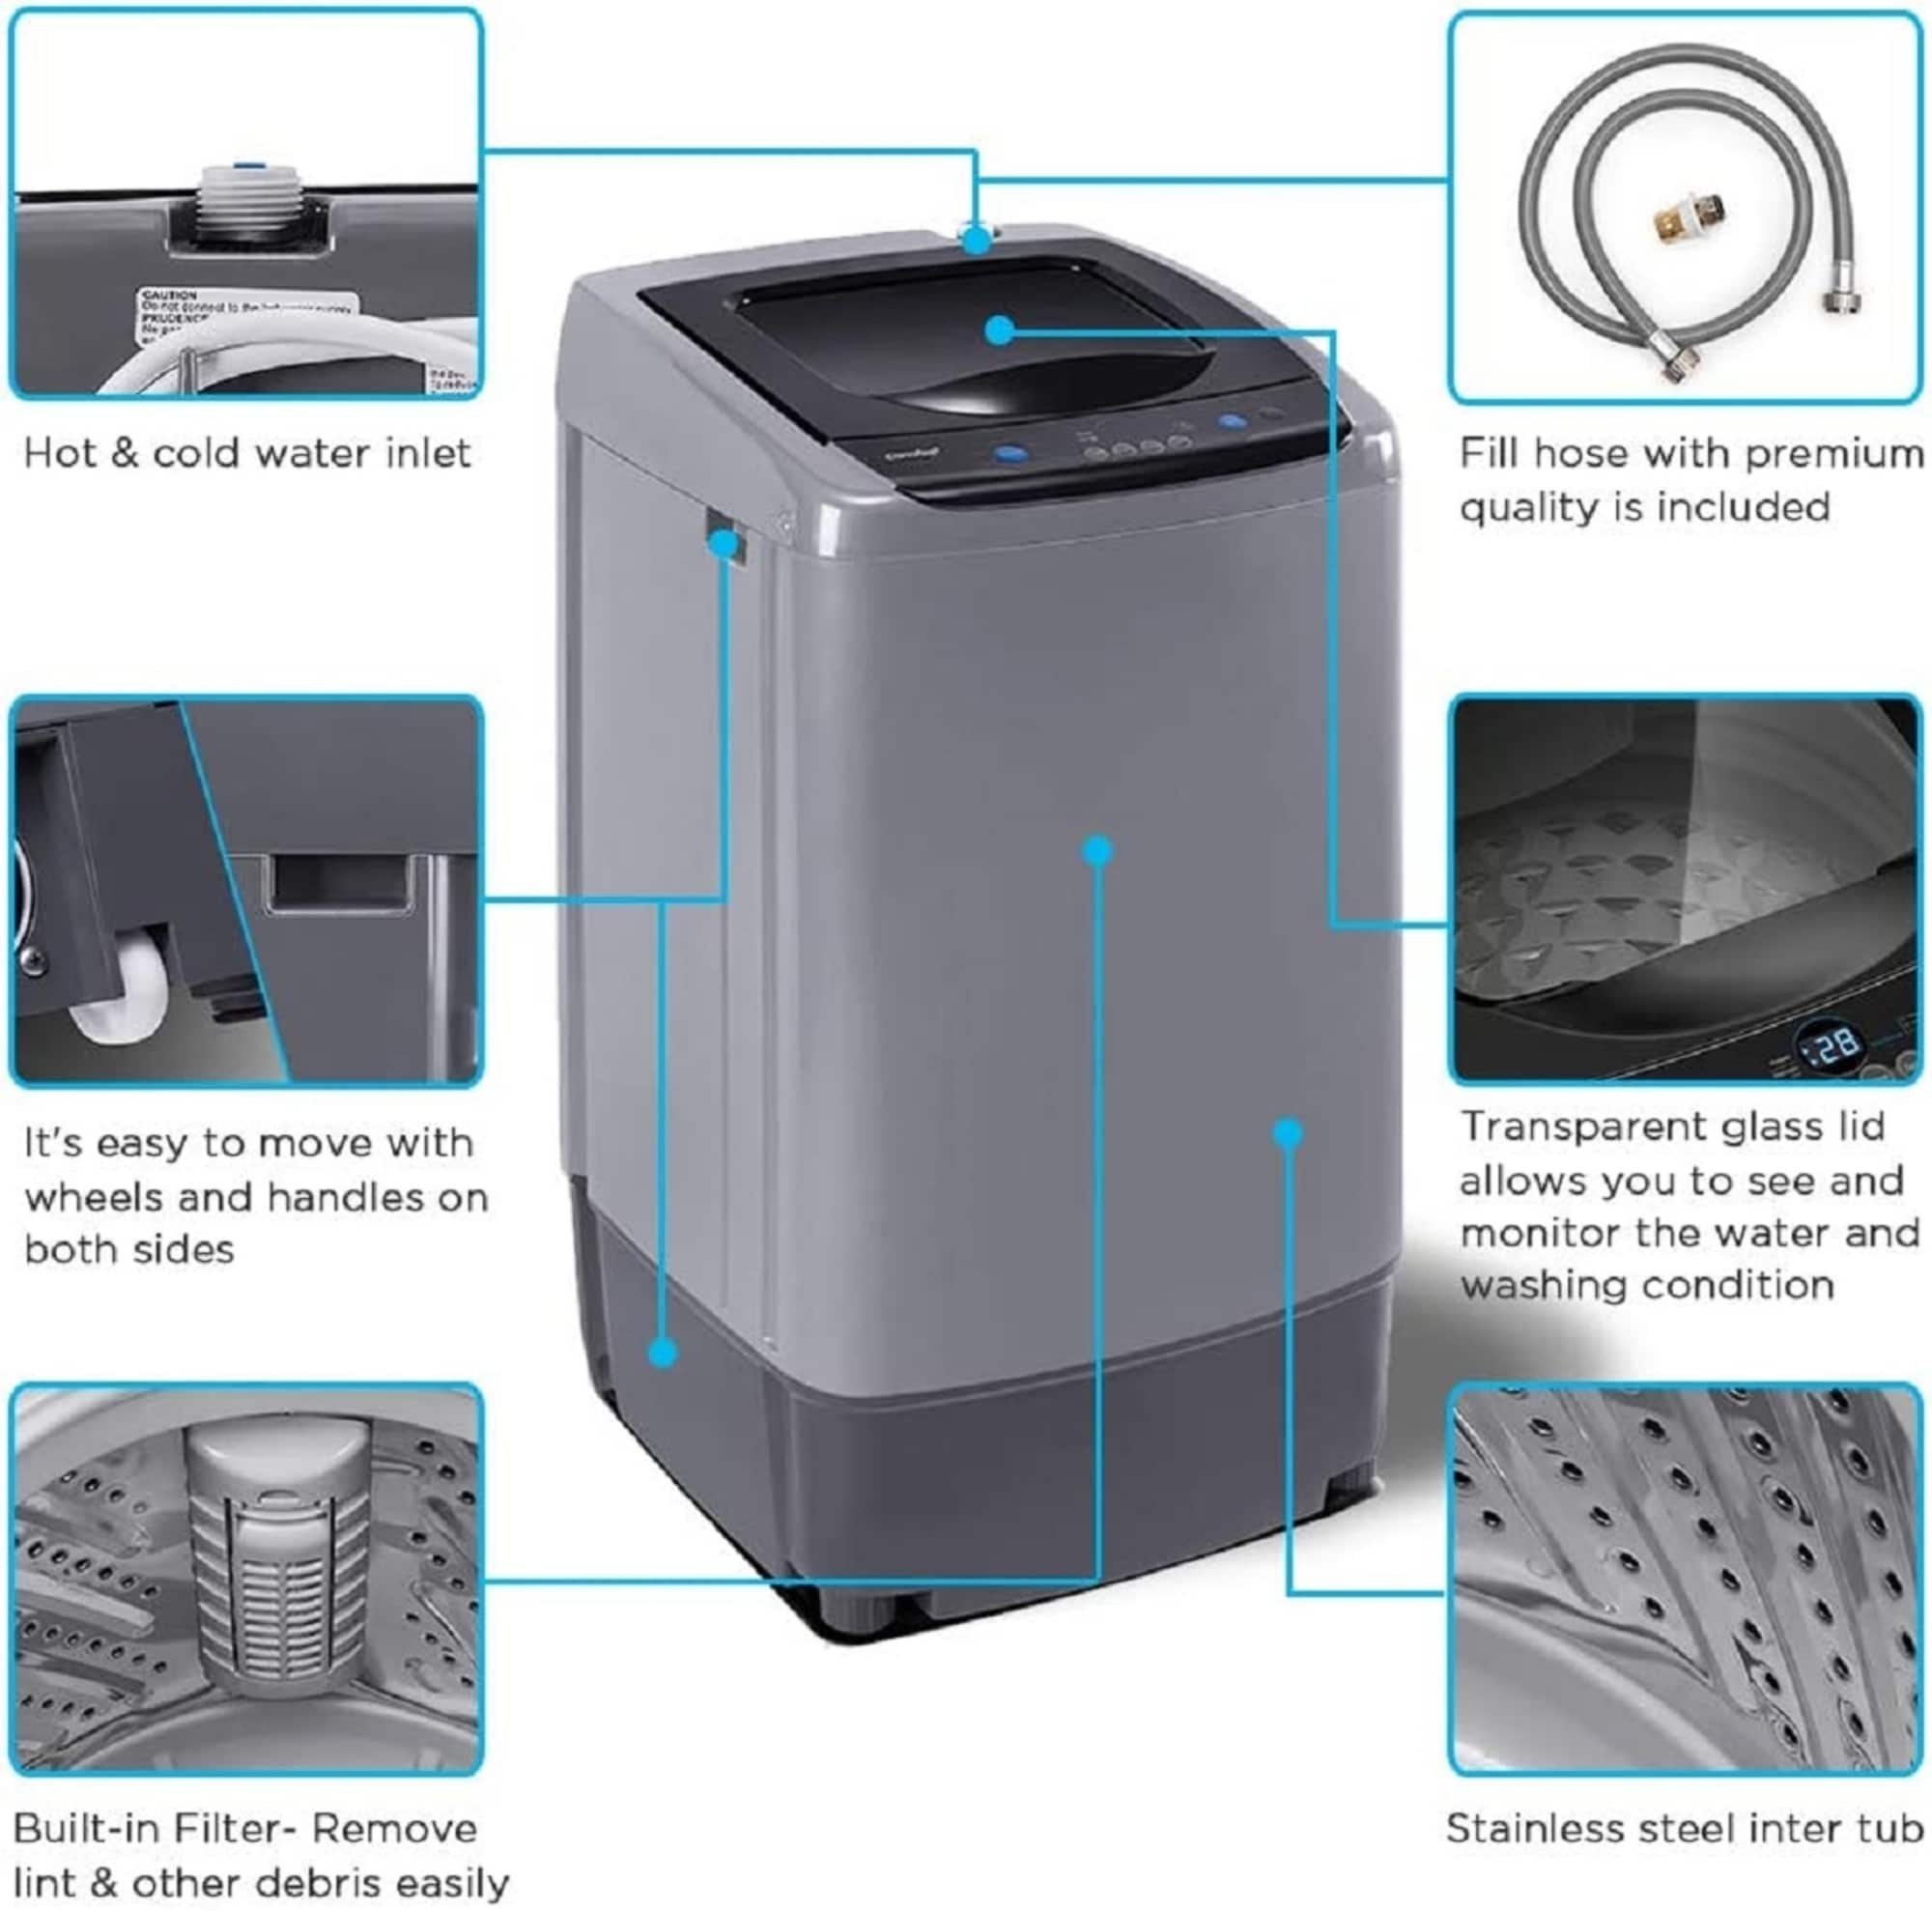 COMFEE' 1.0 Cu.ft LED Fully Automatic Portable Washer